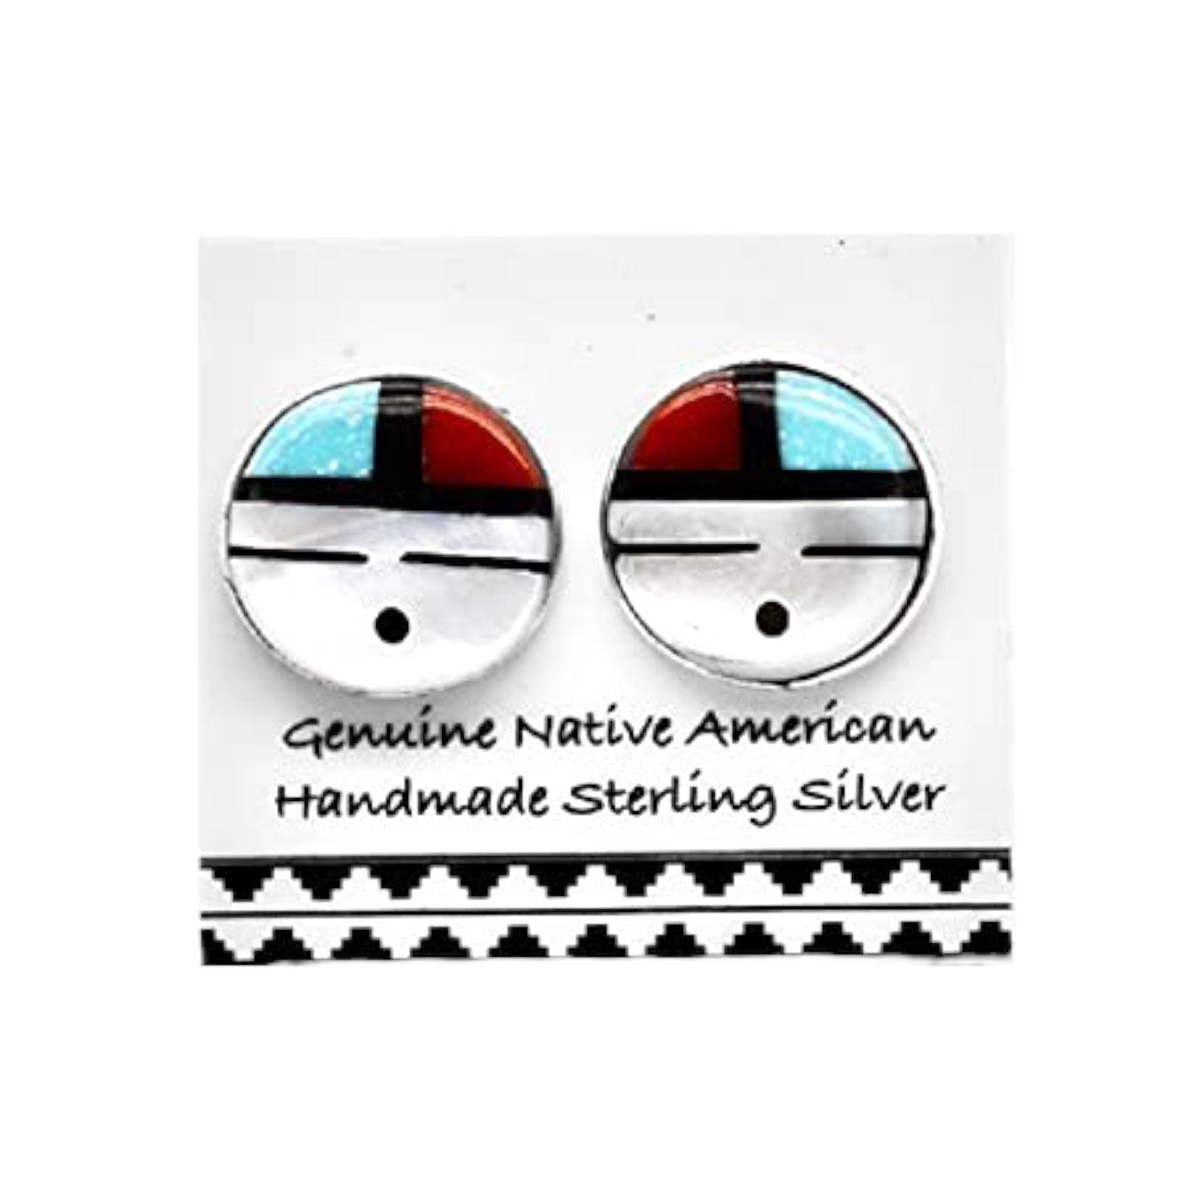 10mm Genuine Stone Zuni Sunface Stud Earrings, Sterling Silver, Turquoise and Coral, Authentic Native American Handmade, Nickel Free